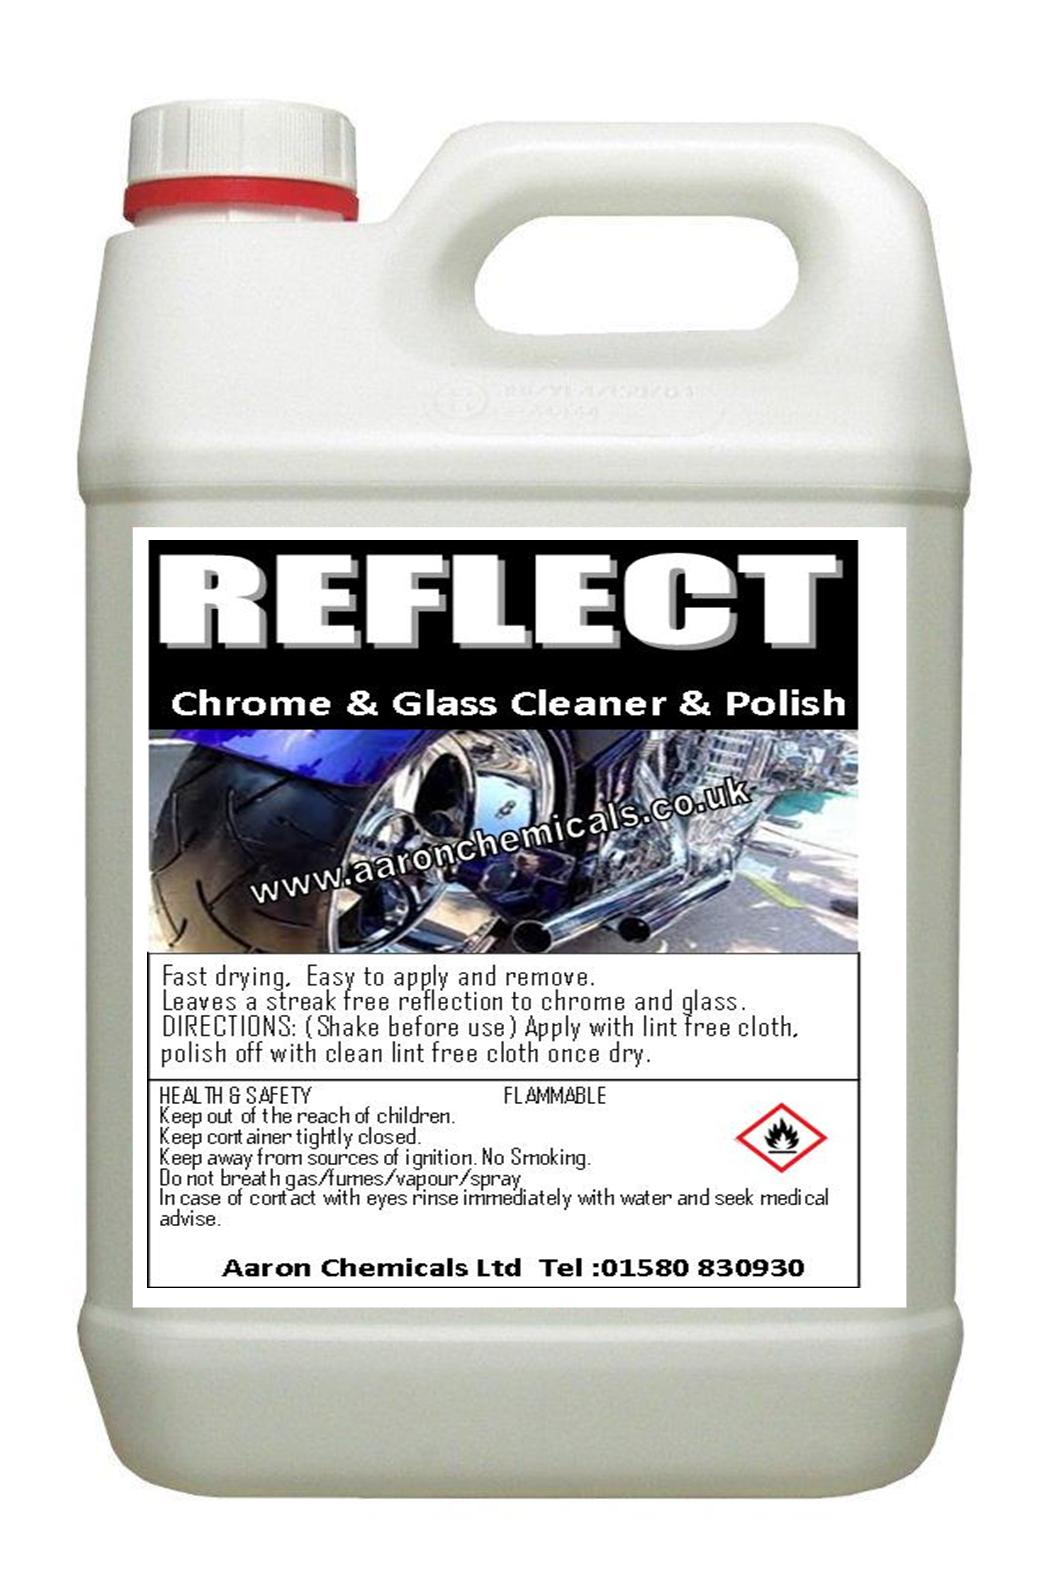 Relect Chrome & Glass Polish, Valeting & Vehicle Cleaning